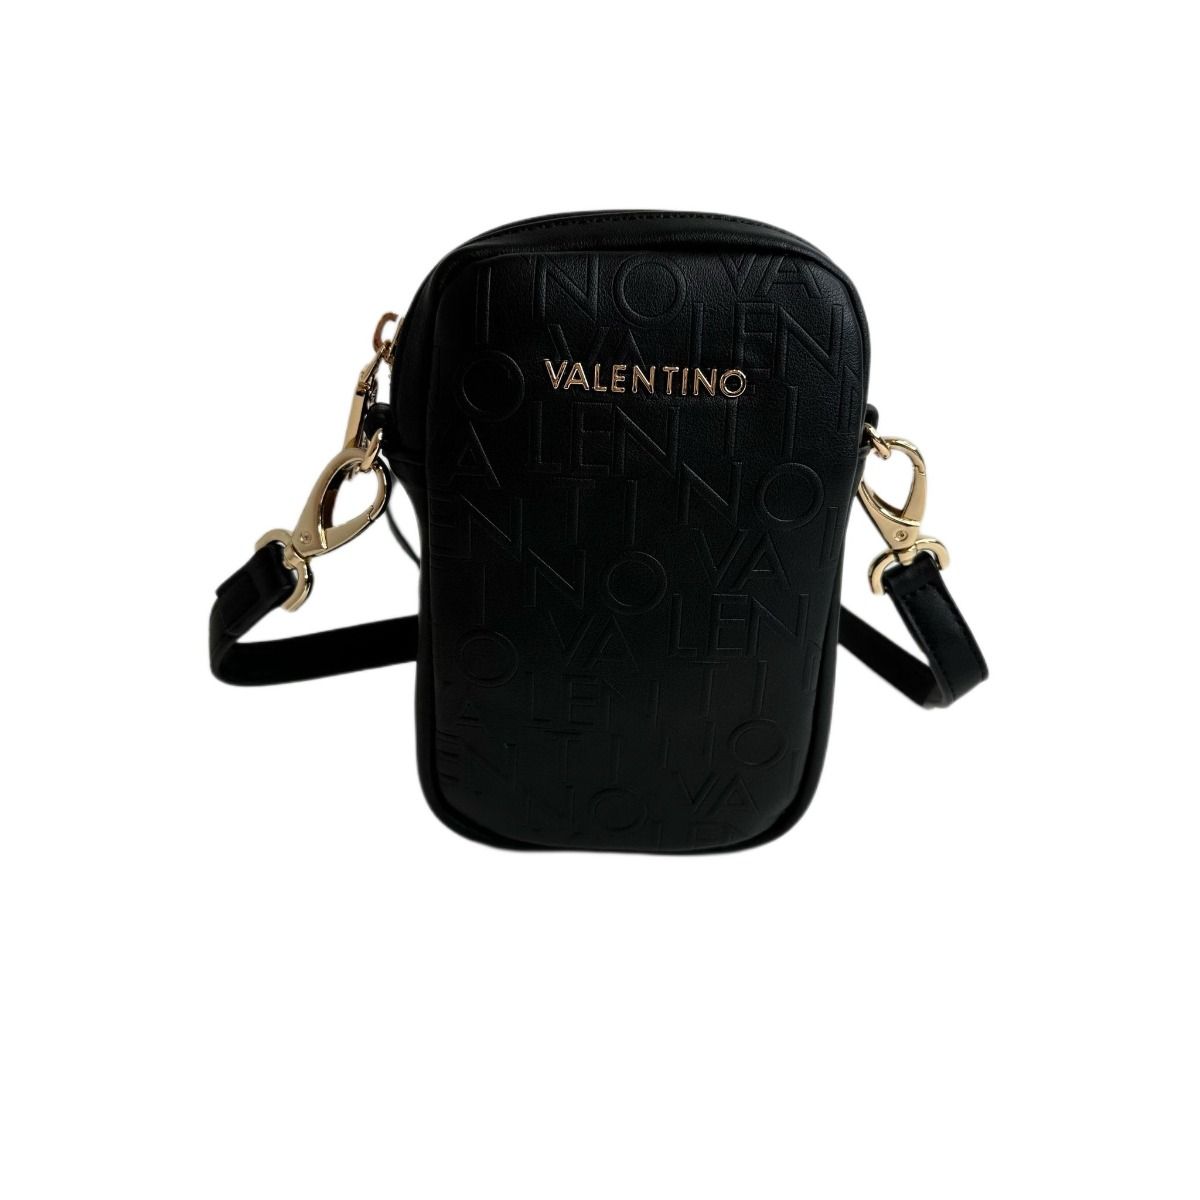 Bungalow skygge Emotion VALENTINO BAGS RELAX WALLET SHOULDERSTRAP 081 NERO - Style Woerden